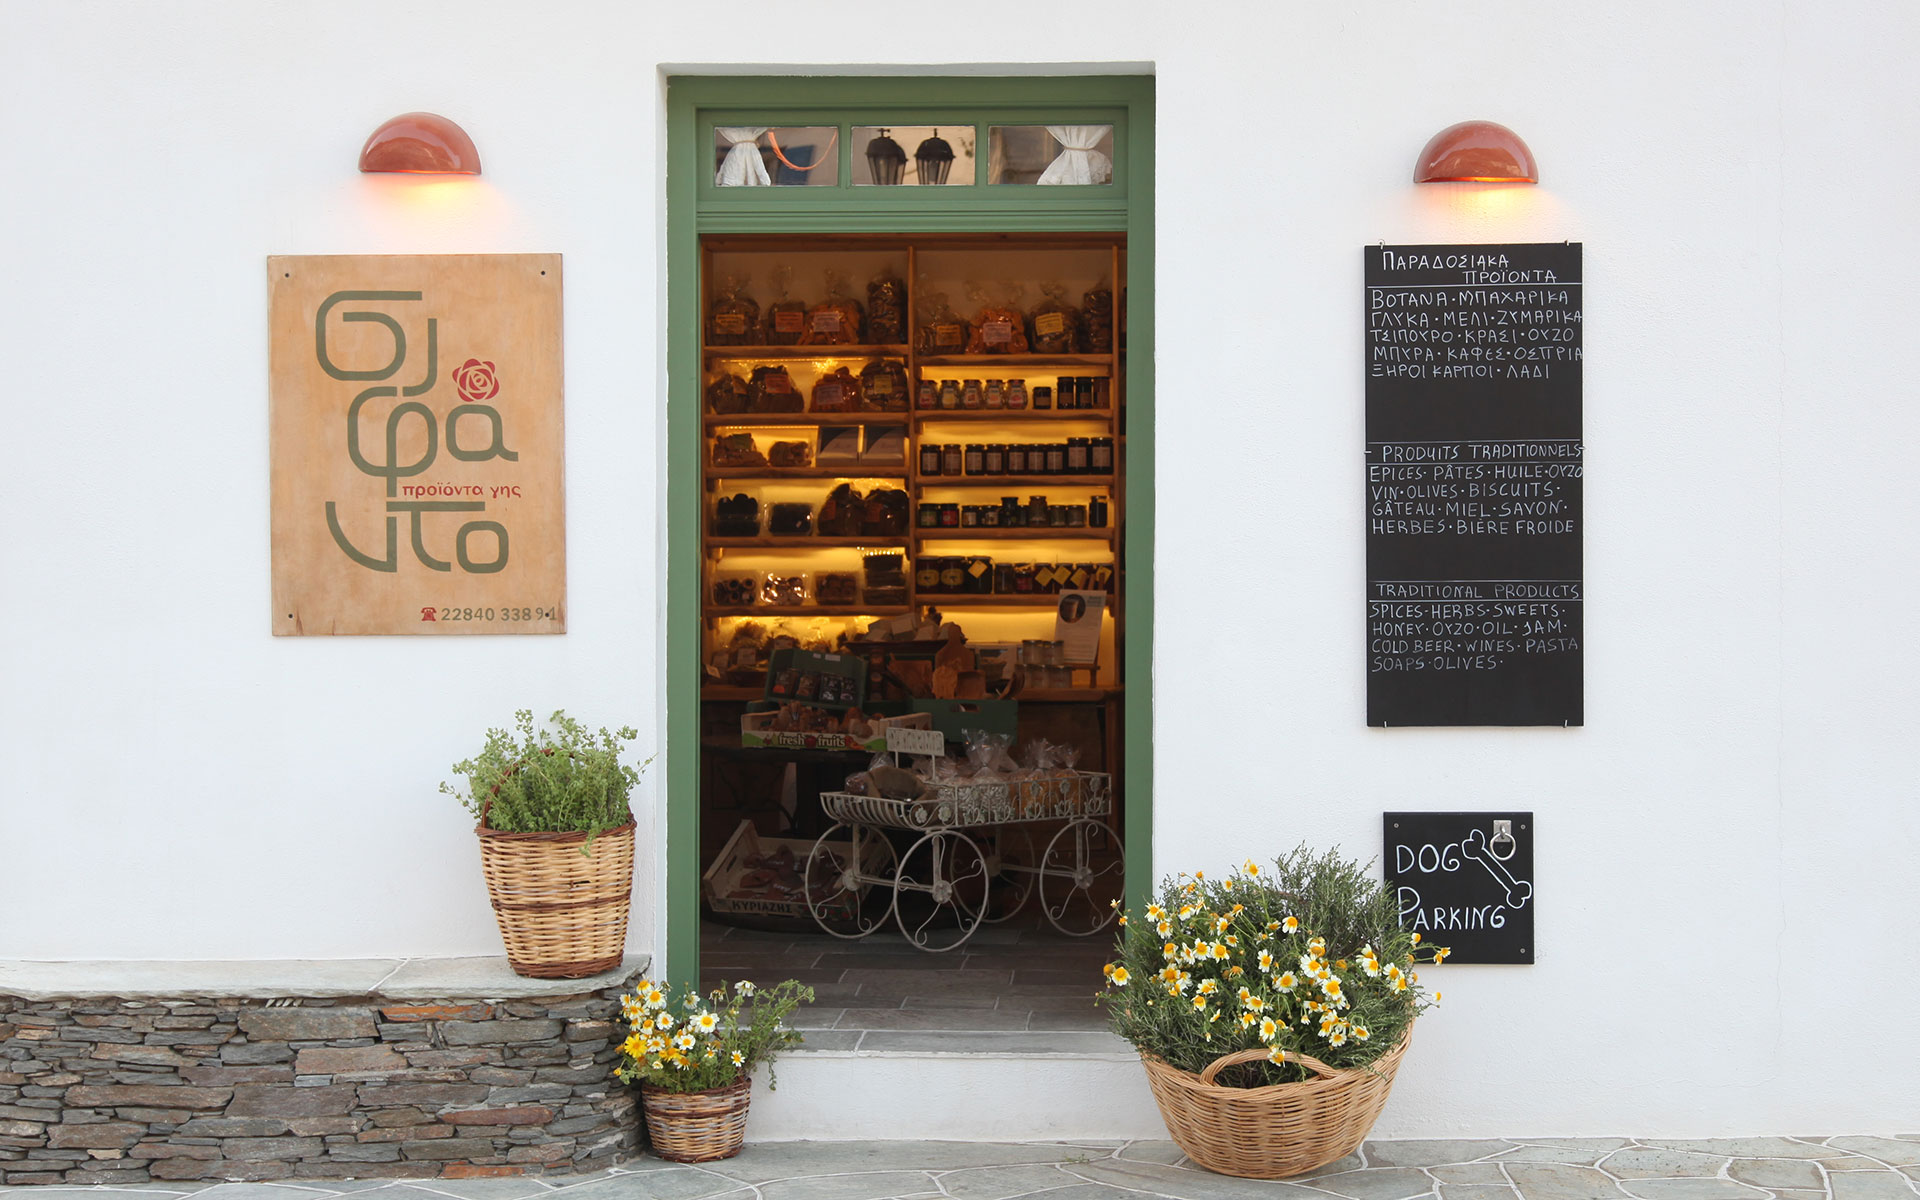 Shop with traditional products in Kamares, Sifnos